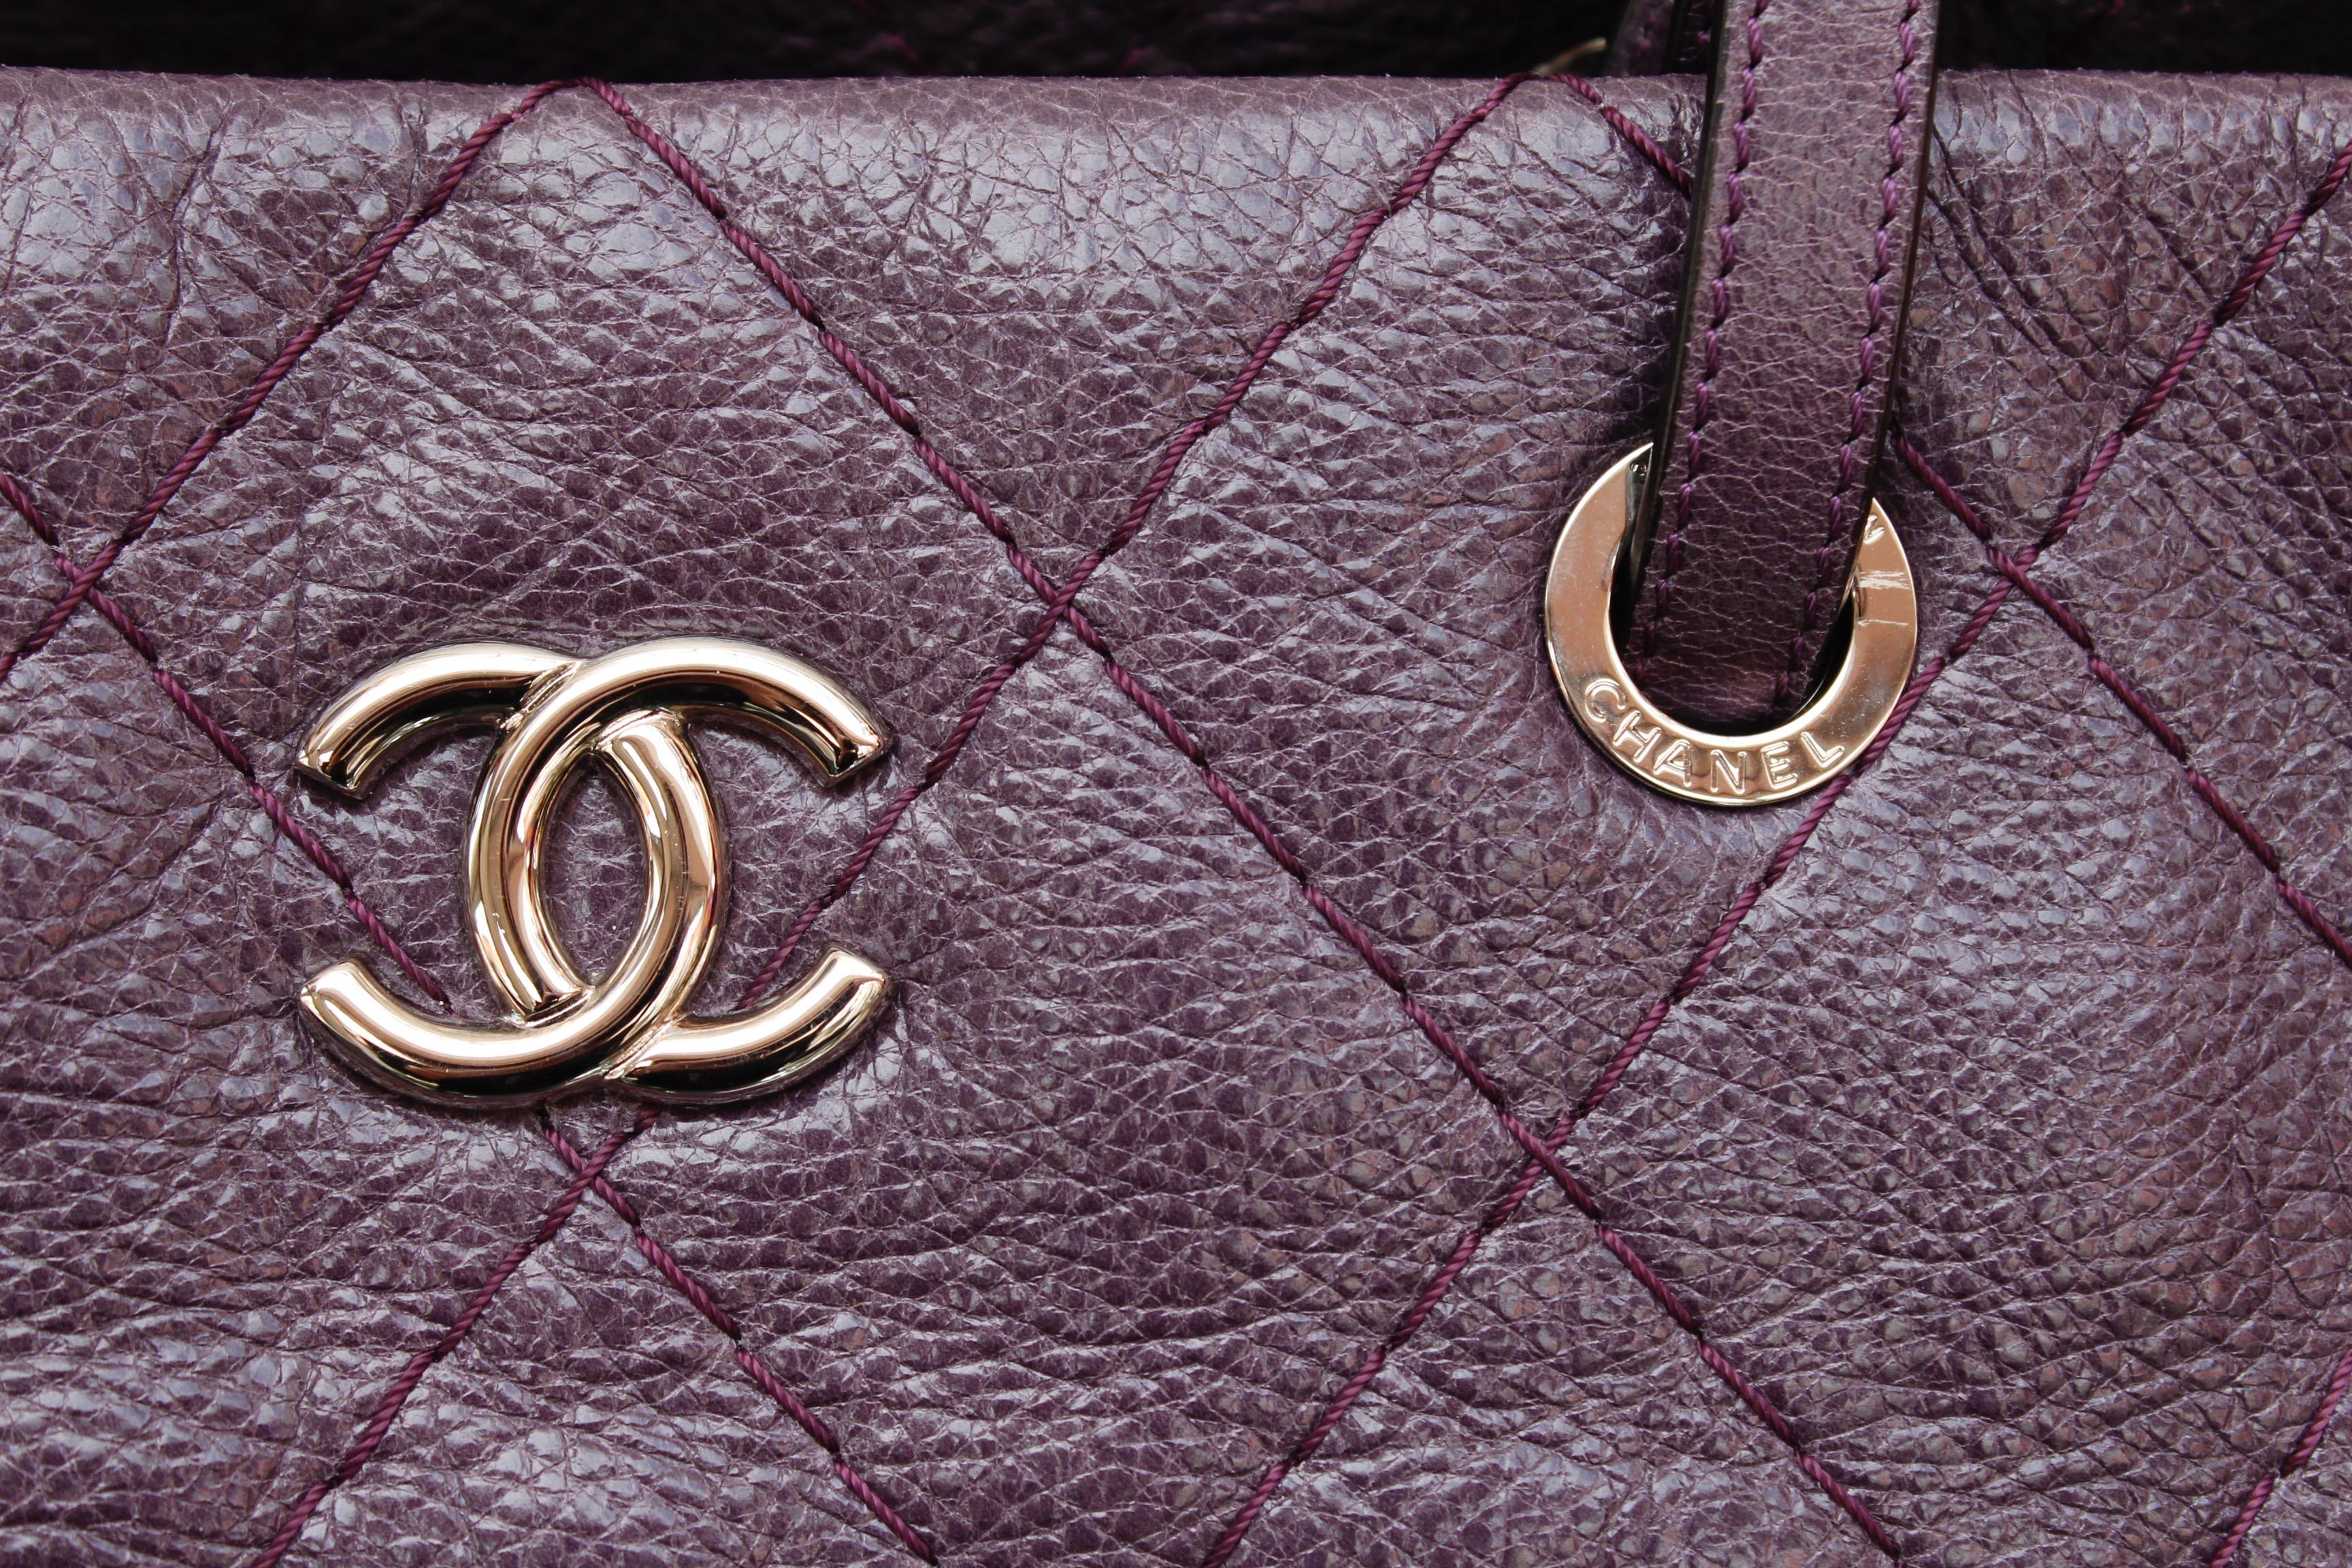 Chanel tote bag in over stitched eggplant leather 5